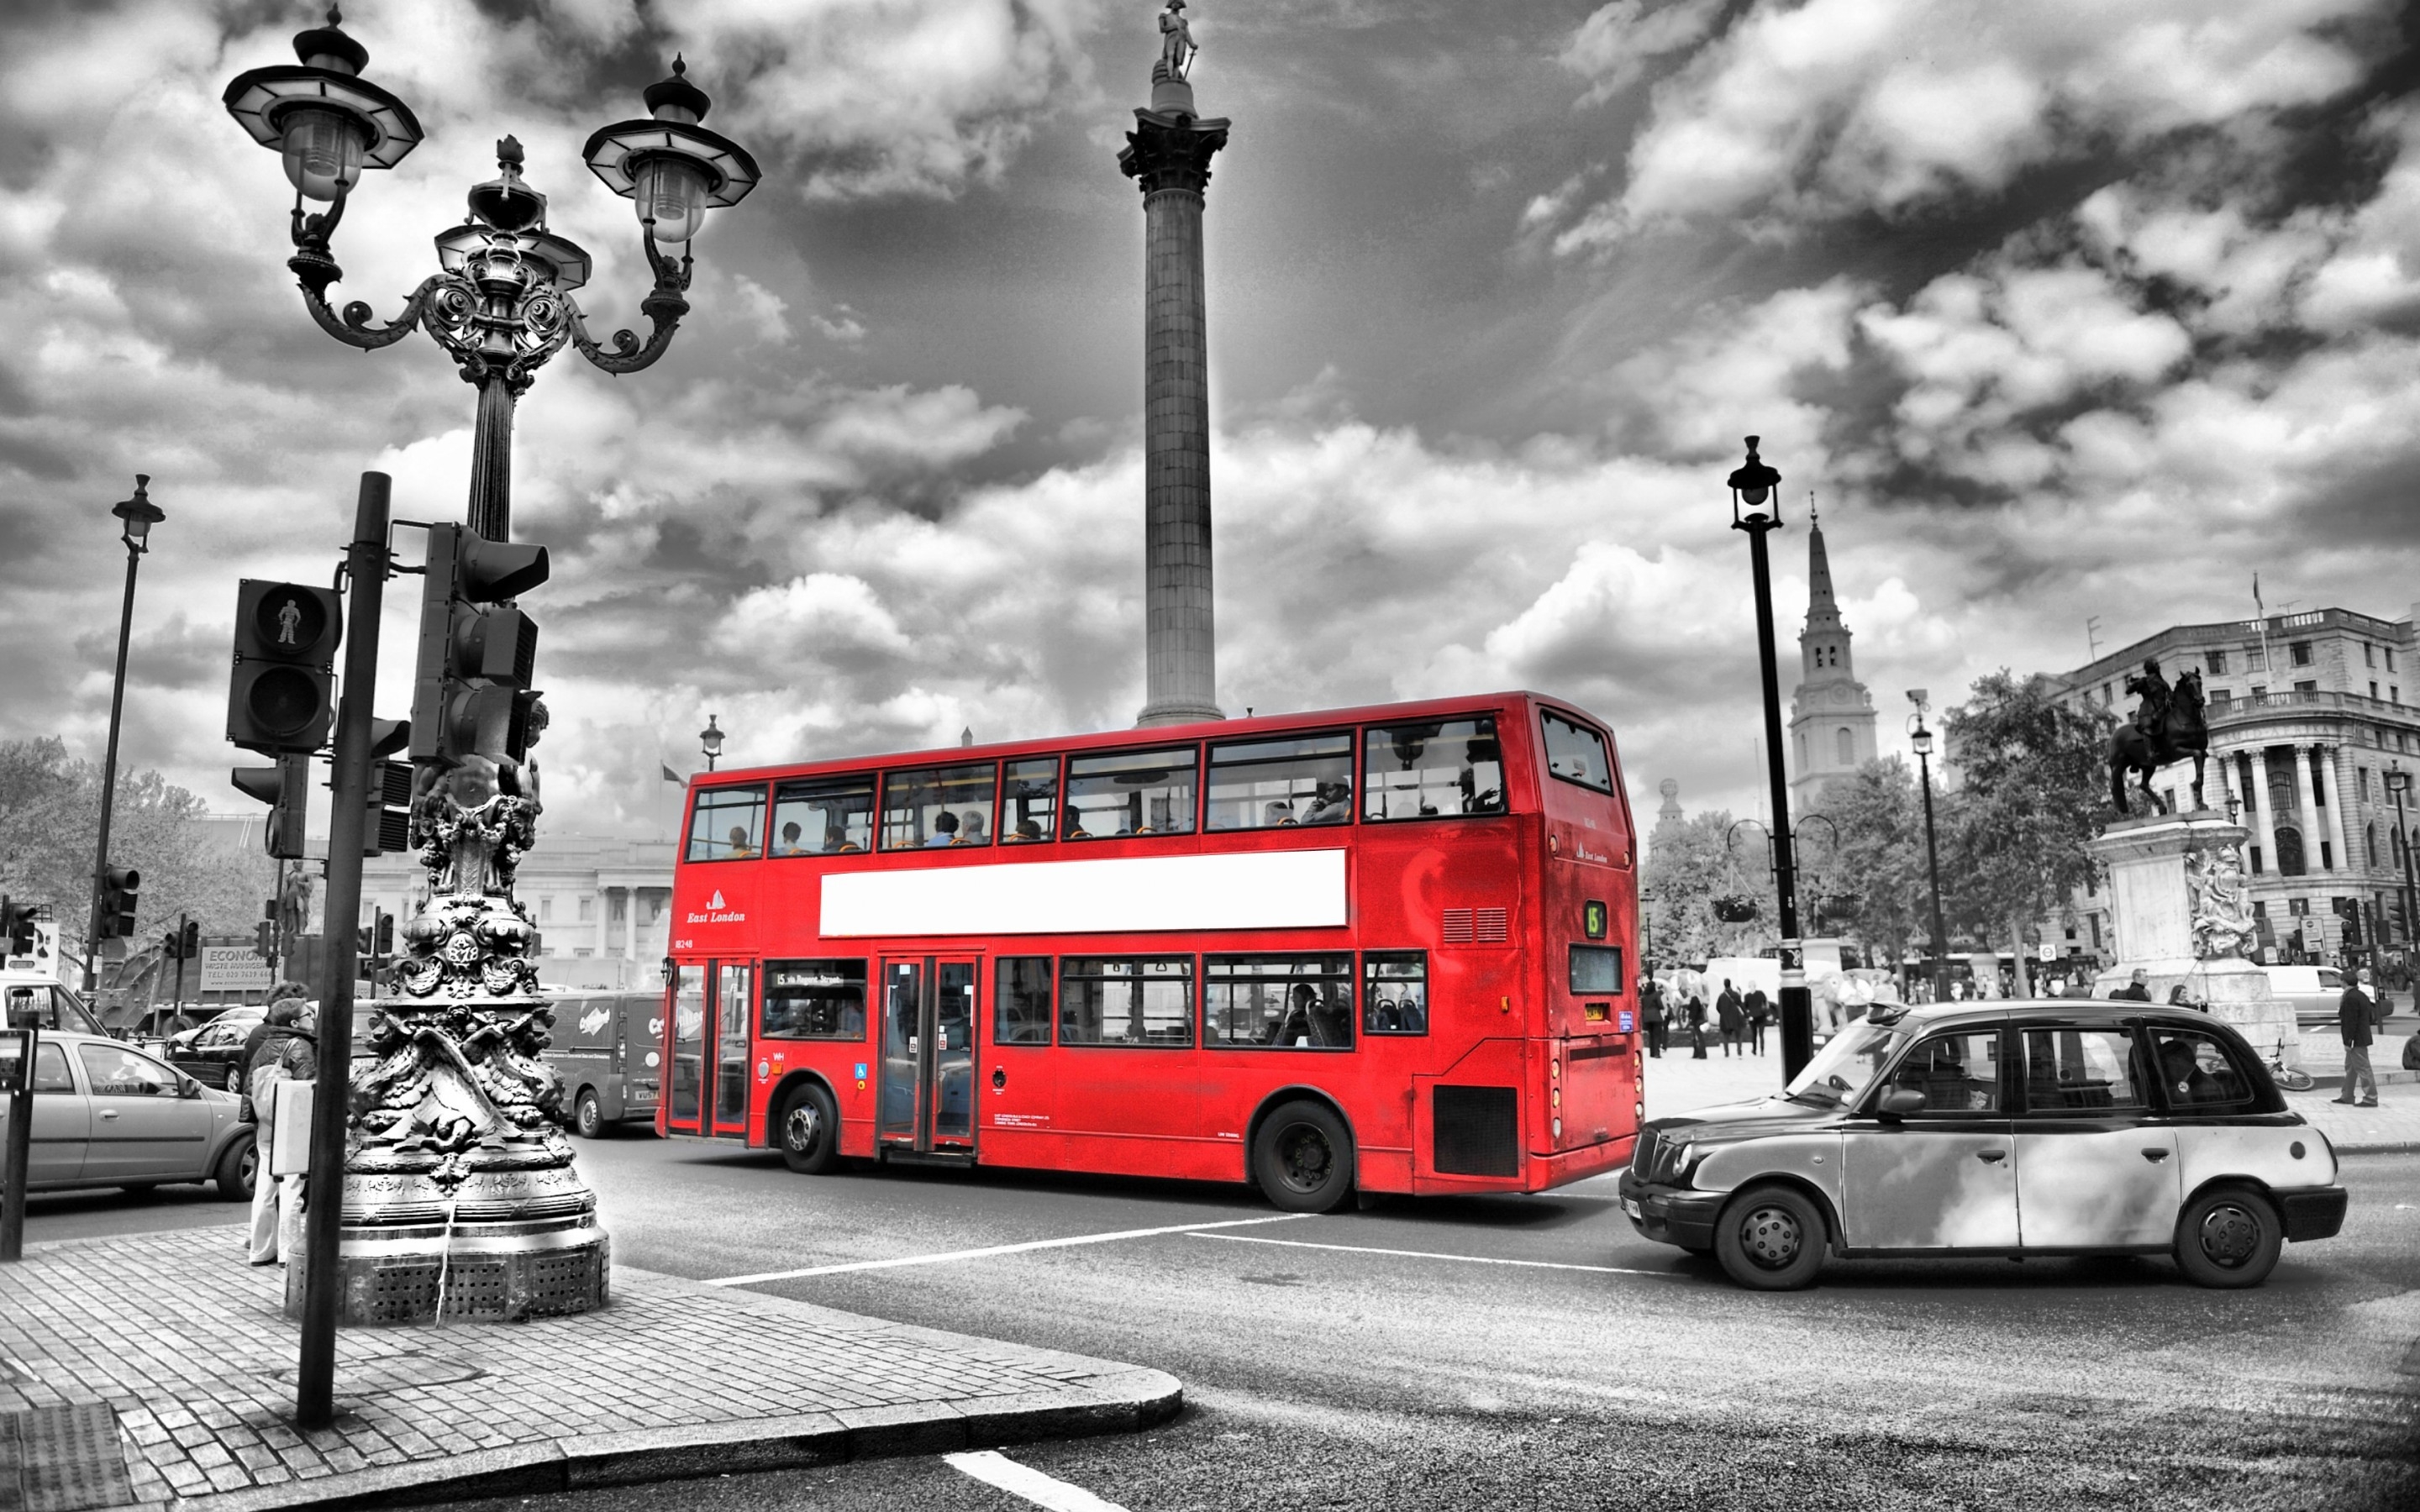 Black and White London for 2880 x 1800 Retina Display resolution